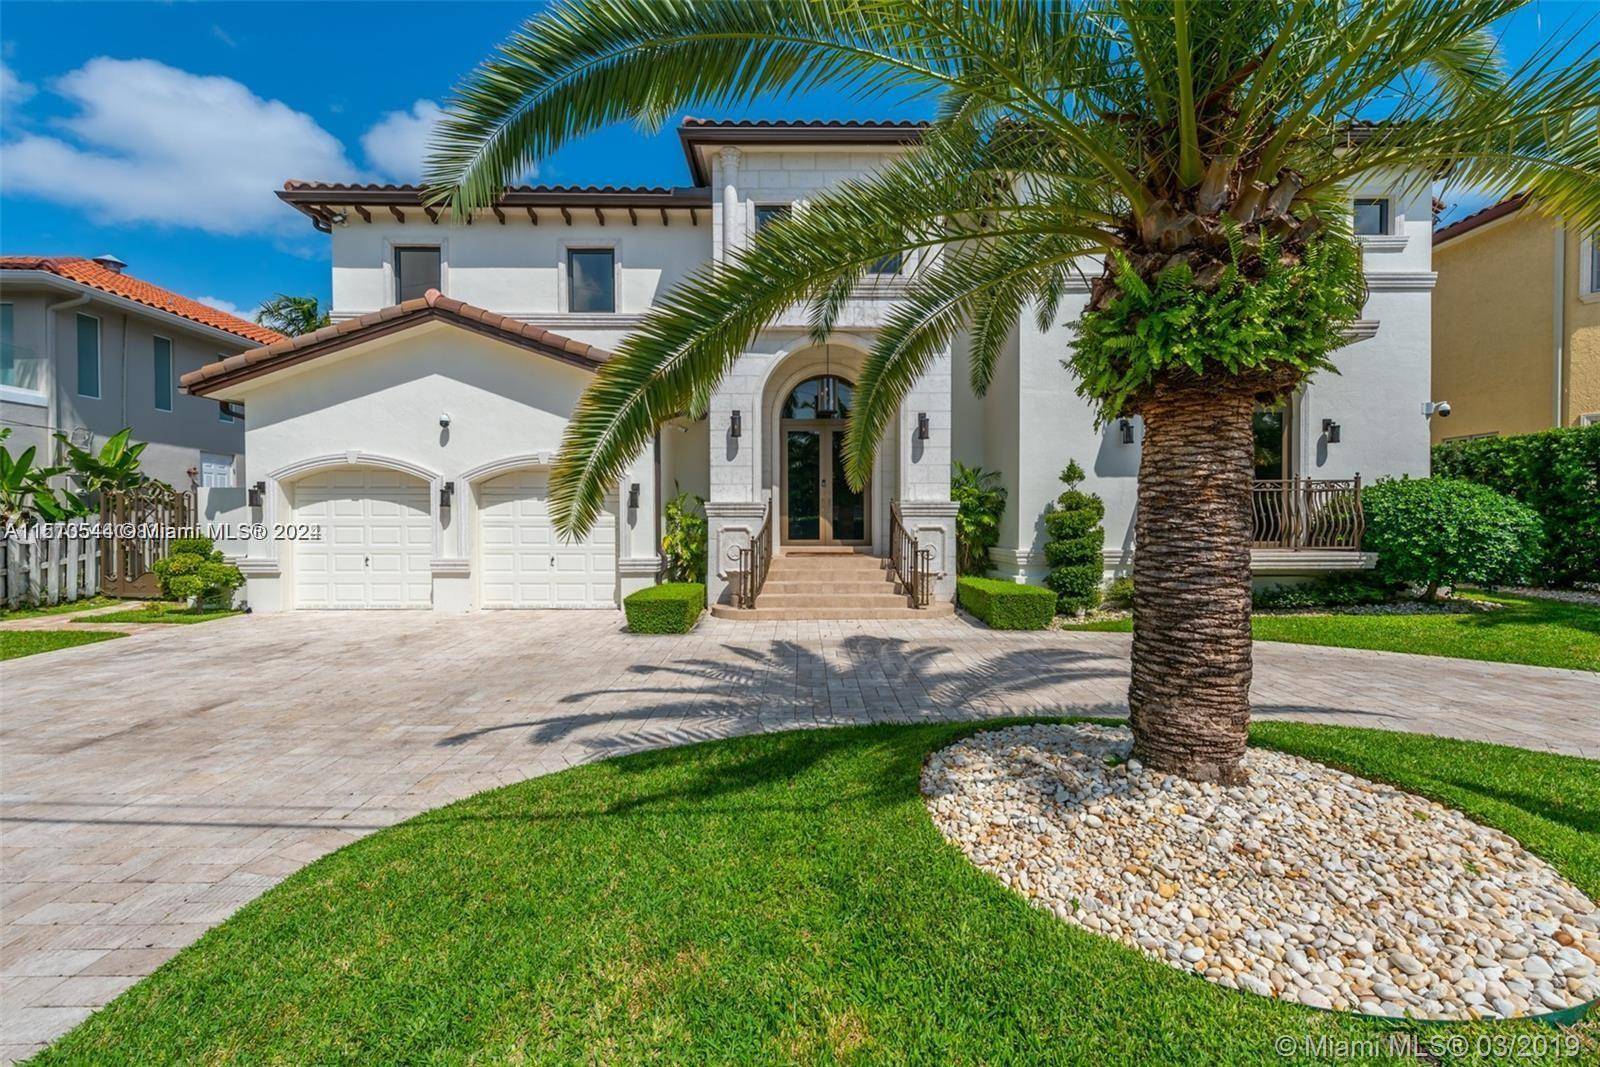 Gorgeous Mediterranean Residence, timeless elegance, this beauty will be loved at first sight !